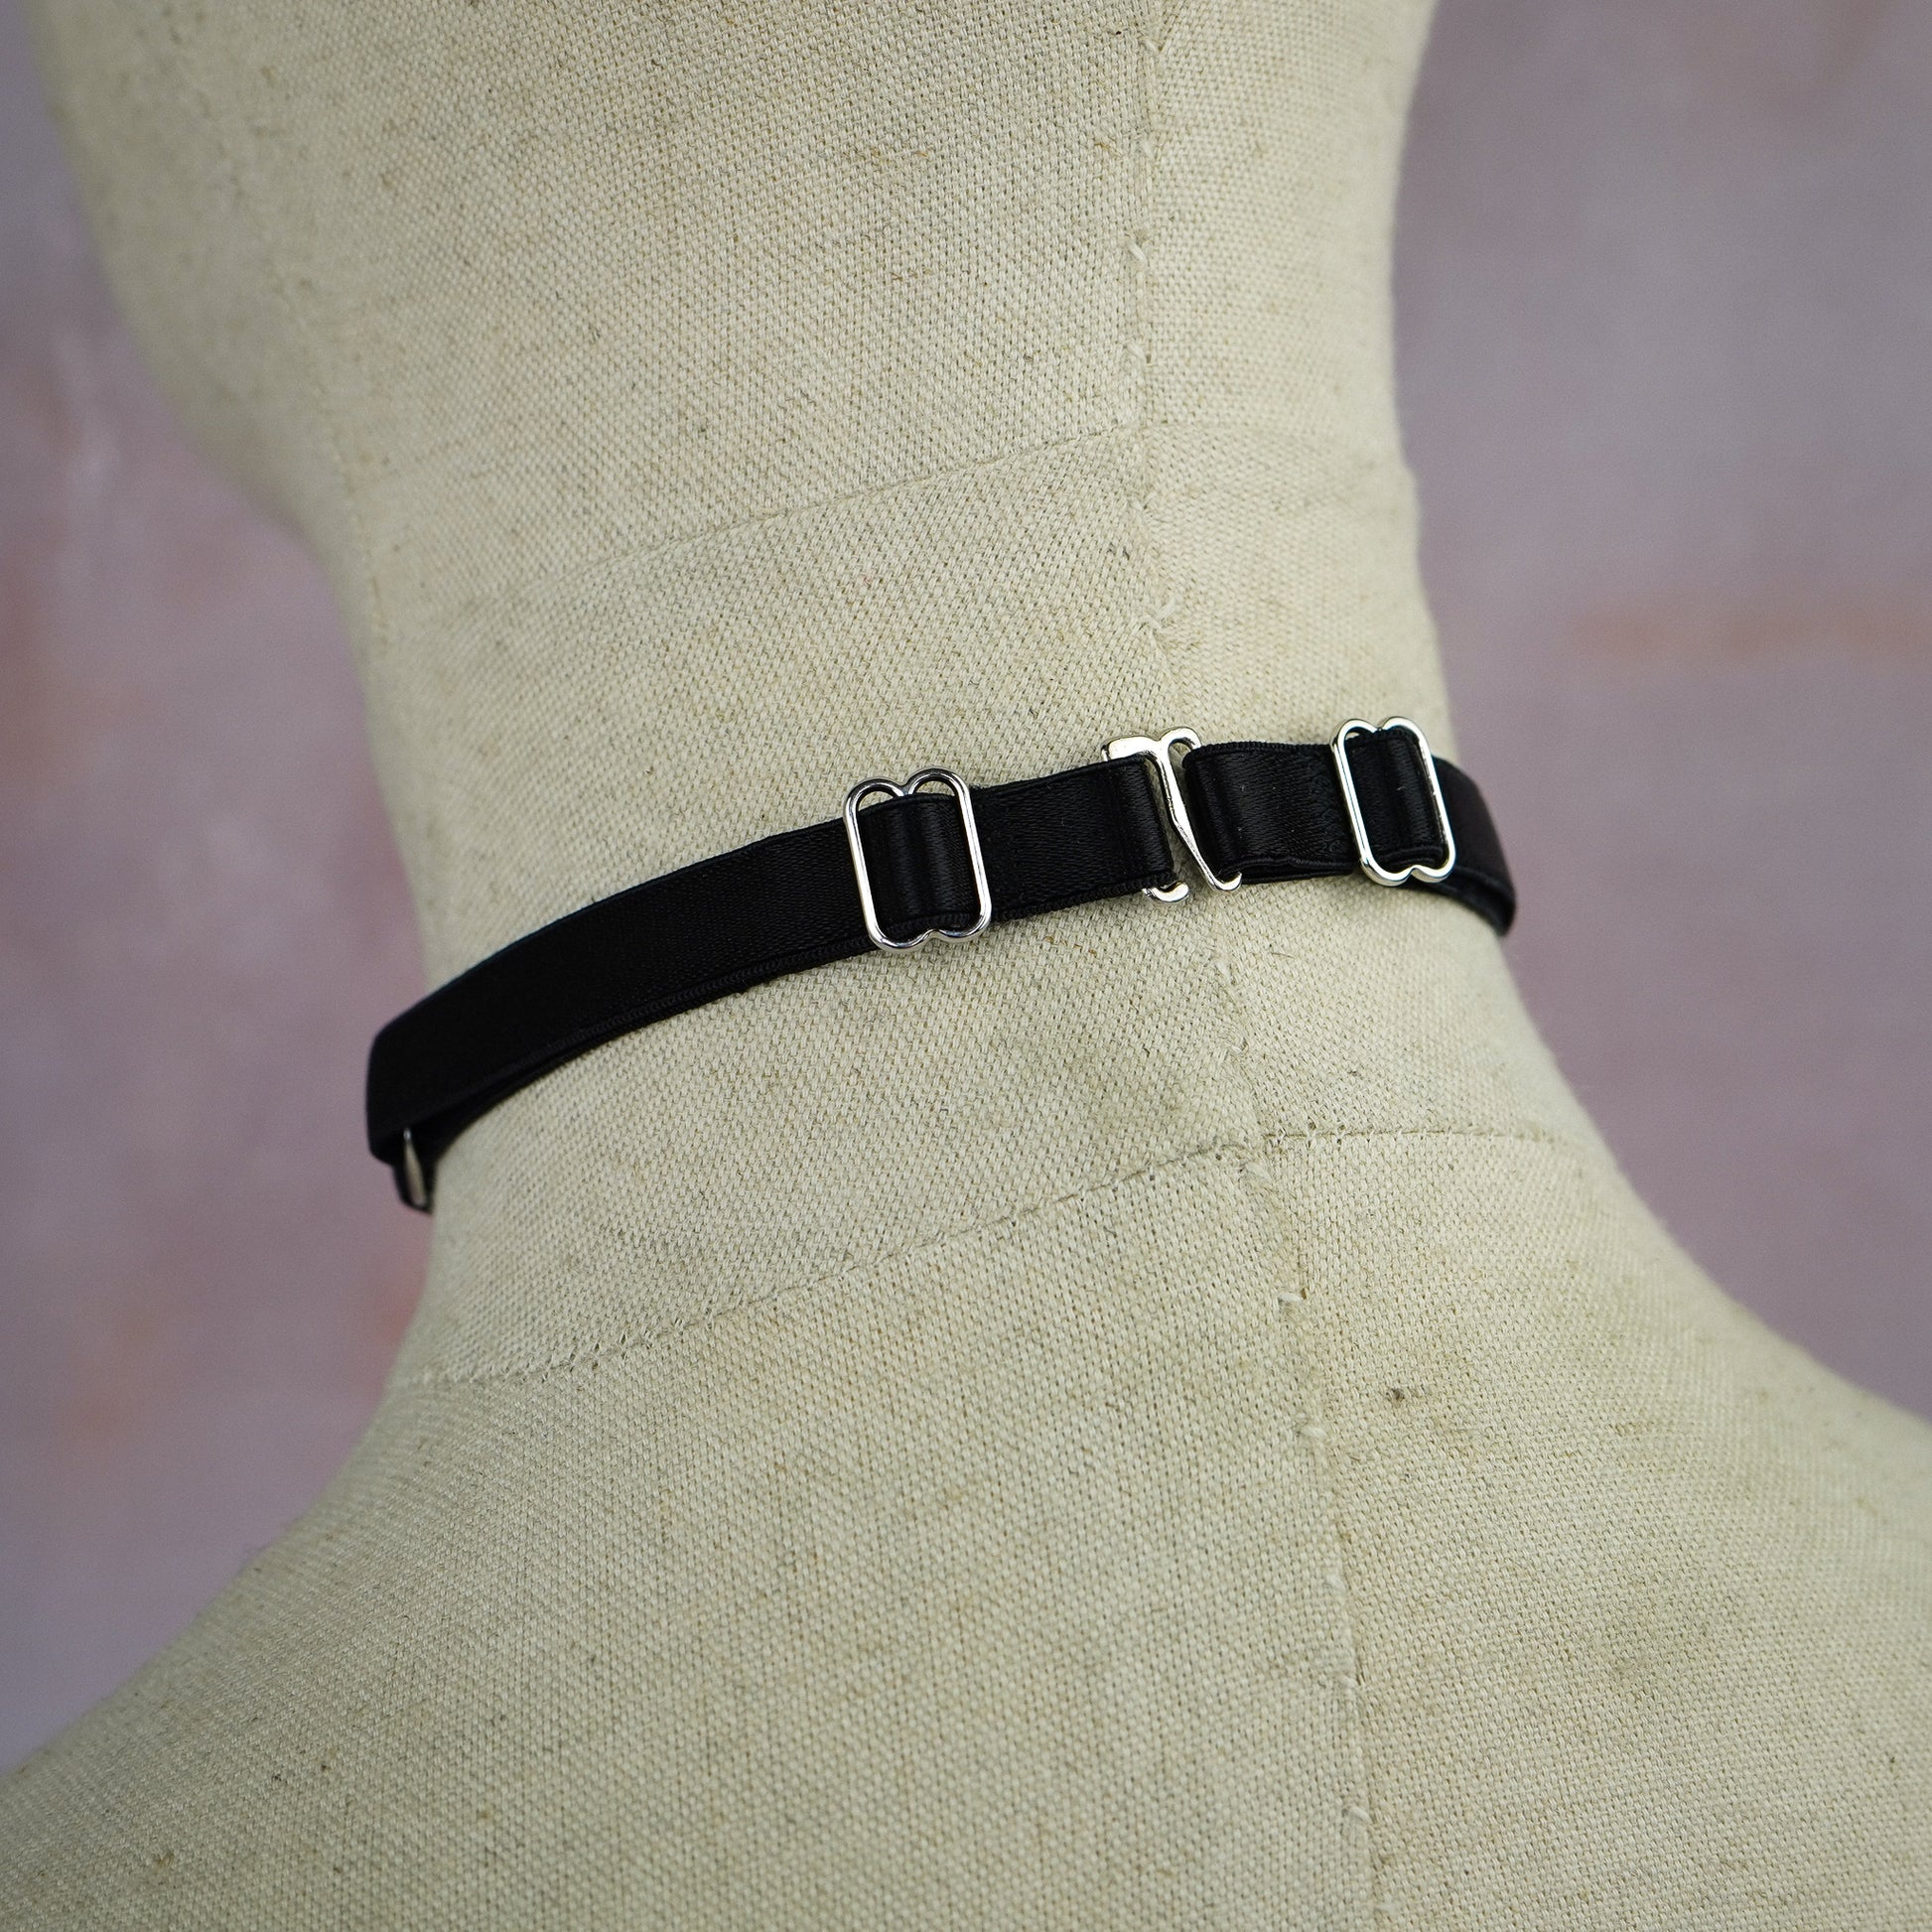 Telyn choker with silver hardware, from the back